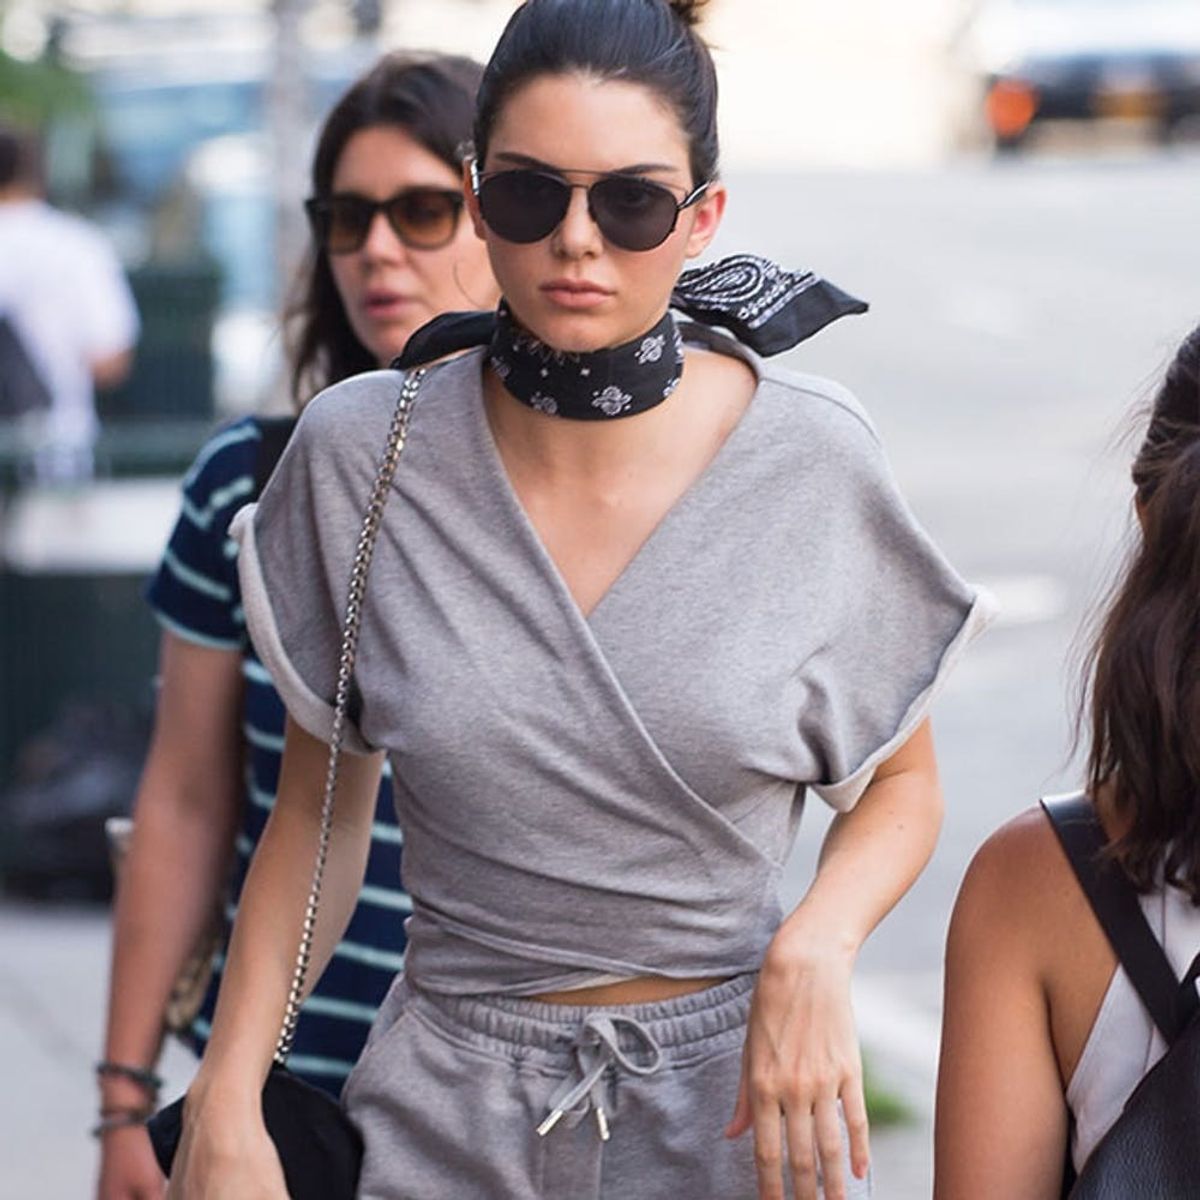 Hack Your Winter Sweatsuit for Summer Just Like Kendall Jenner